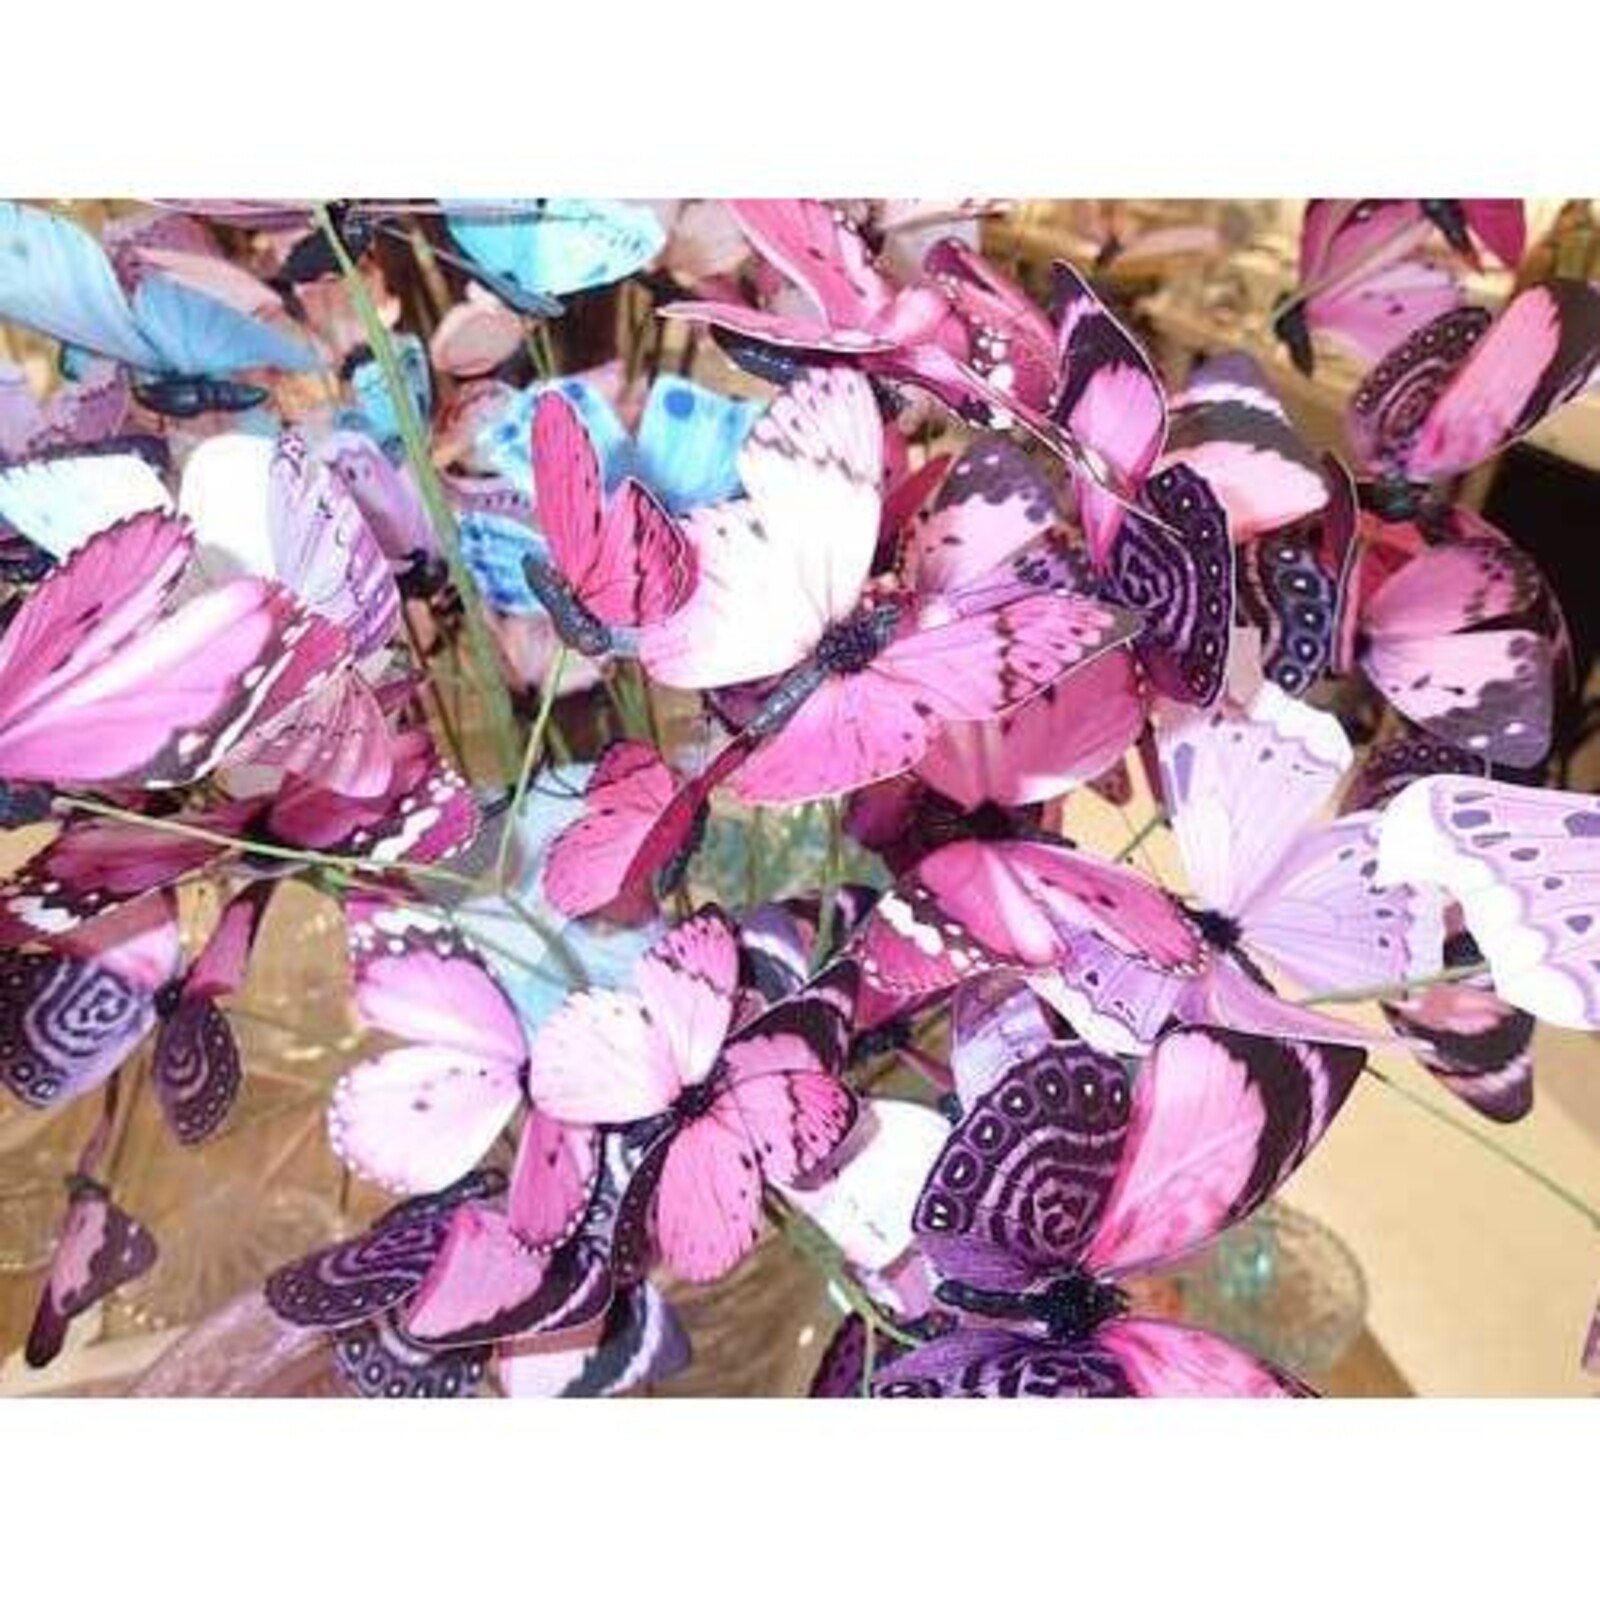 Butterfly Stem Pink Bright